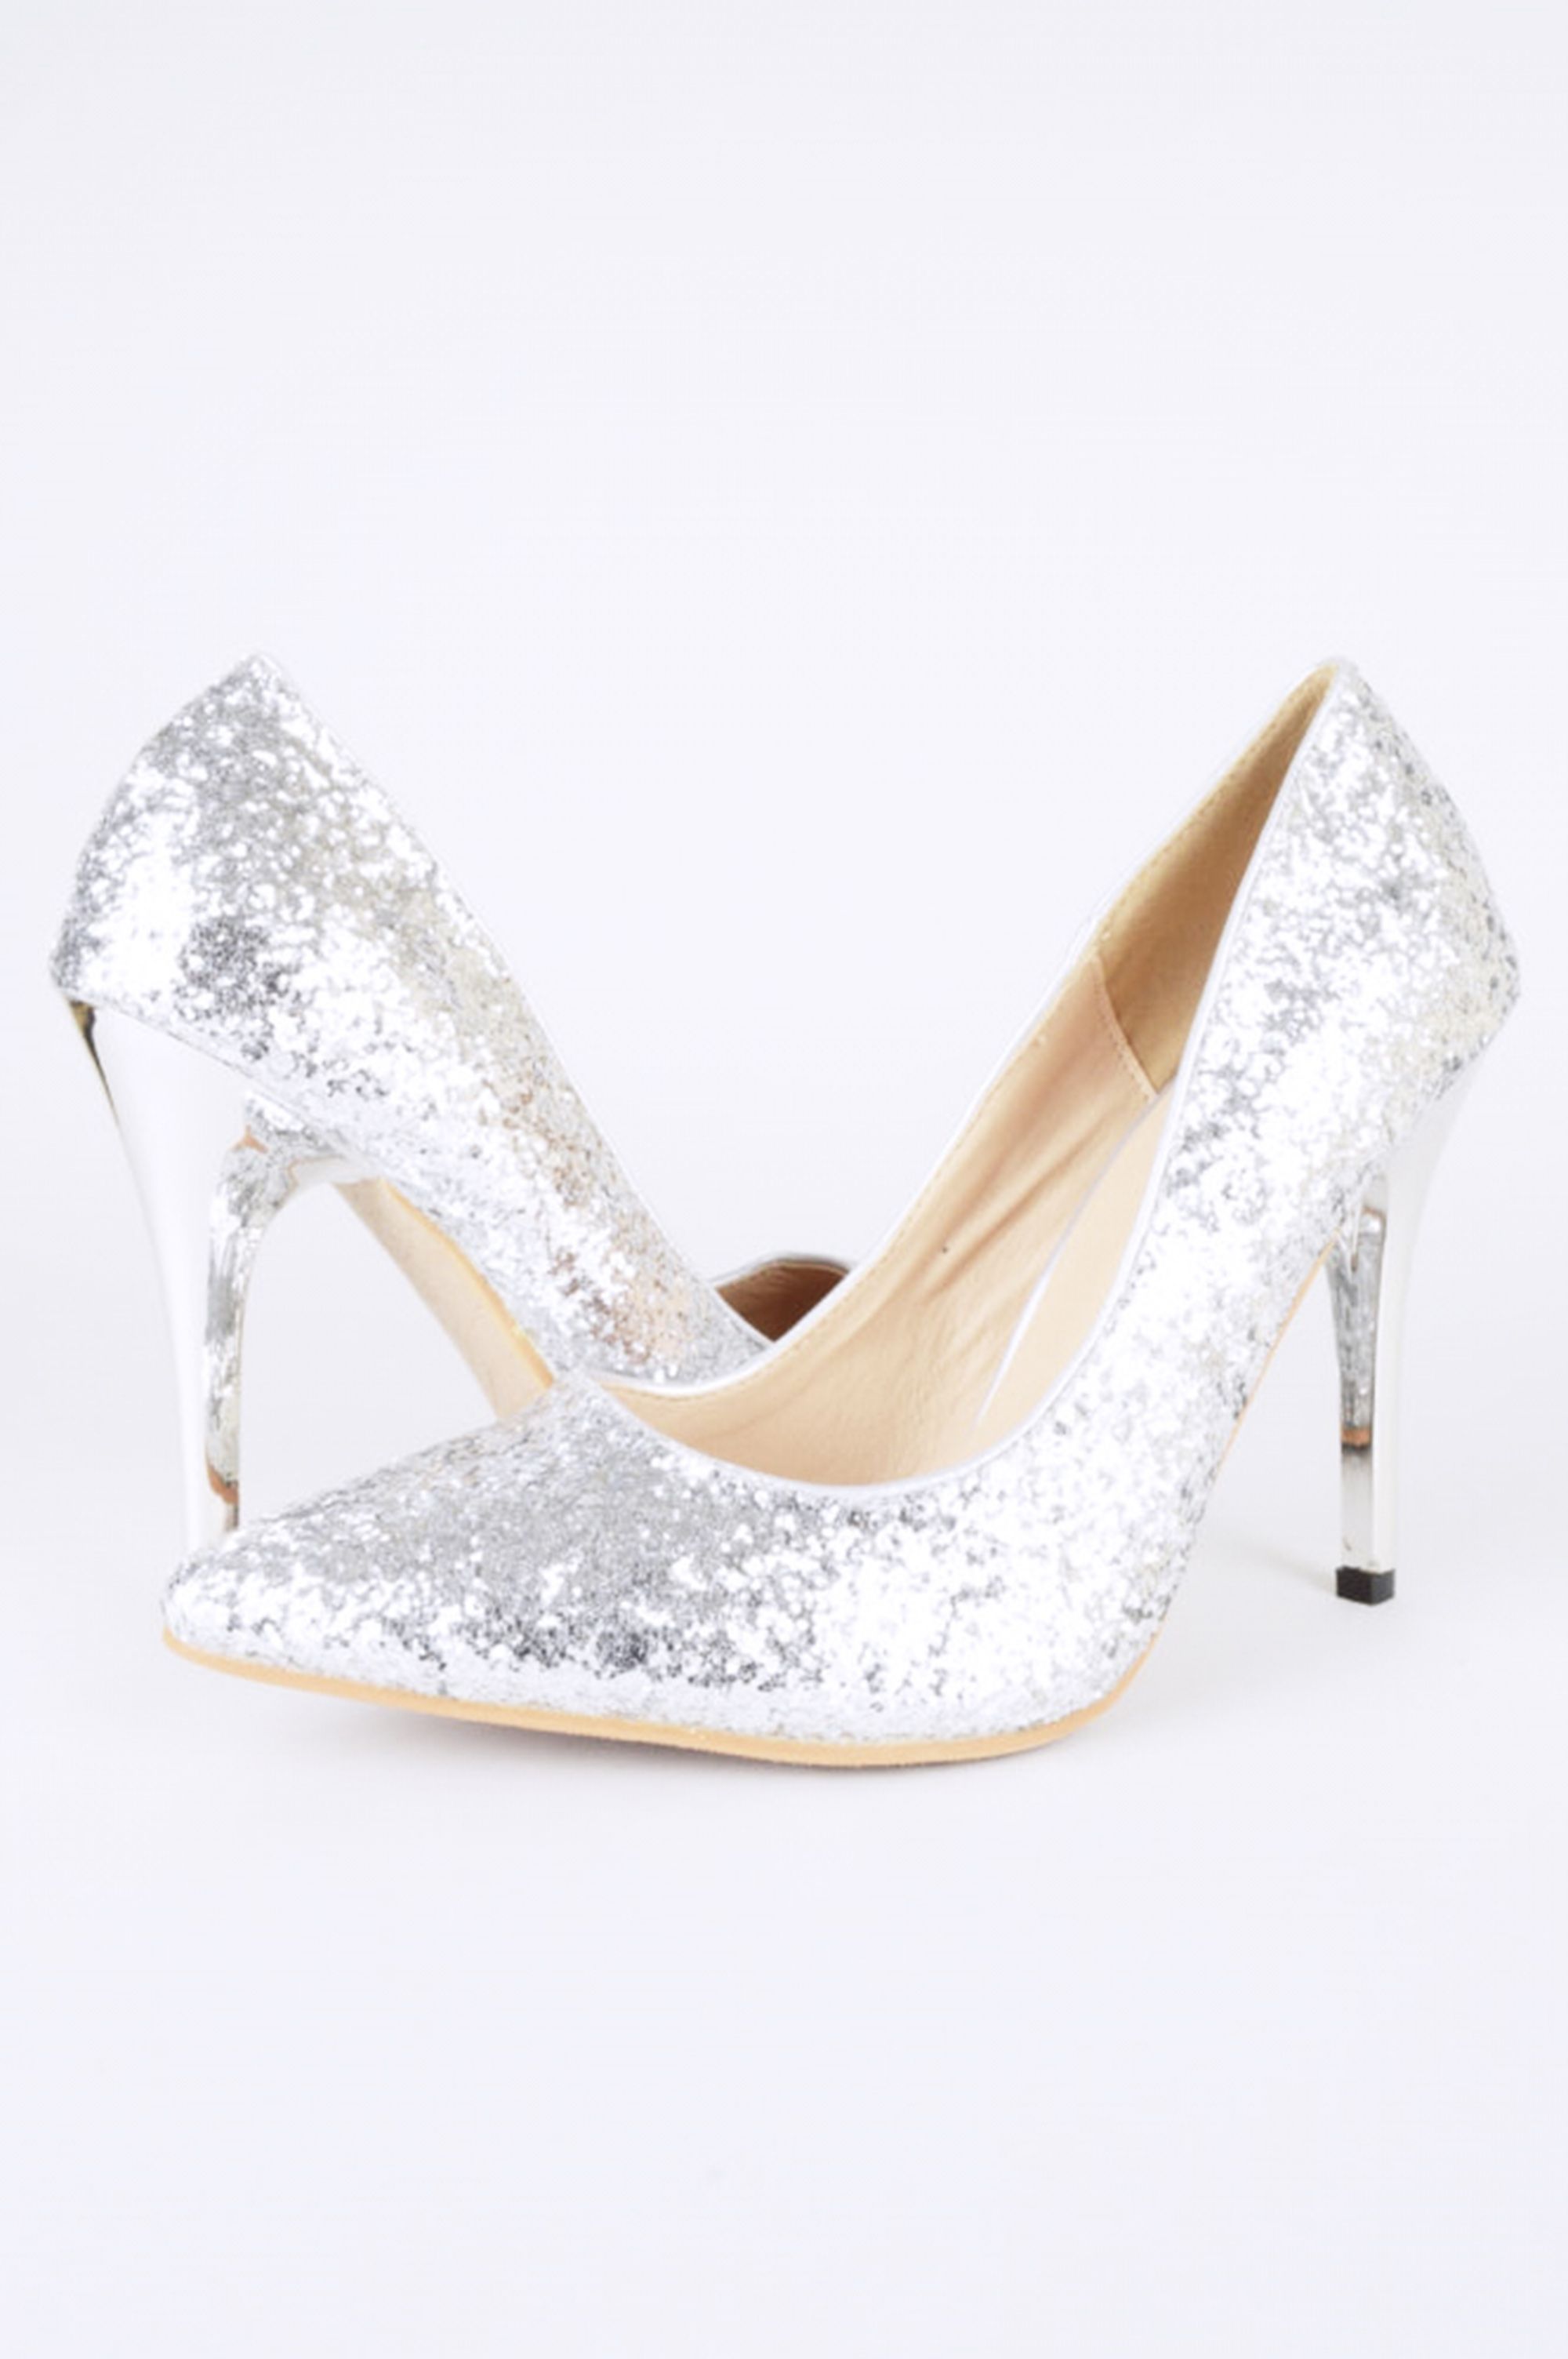 Lovemystyle All Over Silver Glitter Court Shoe Heels